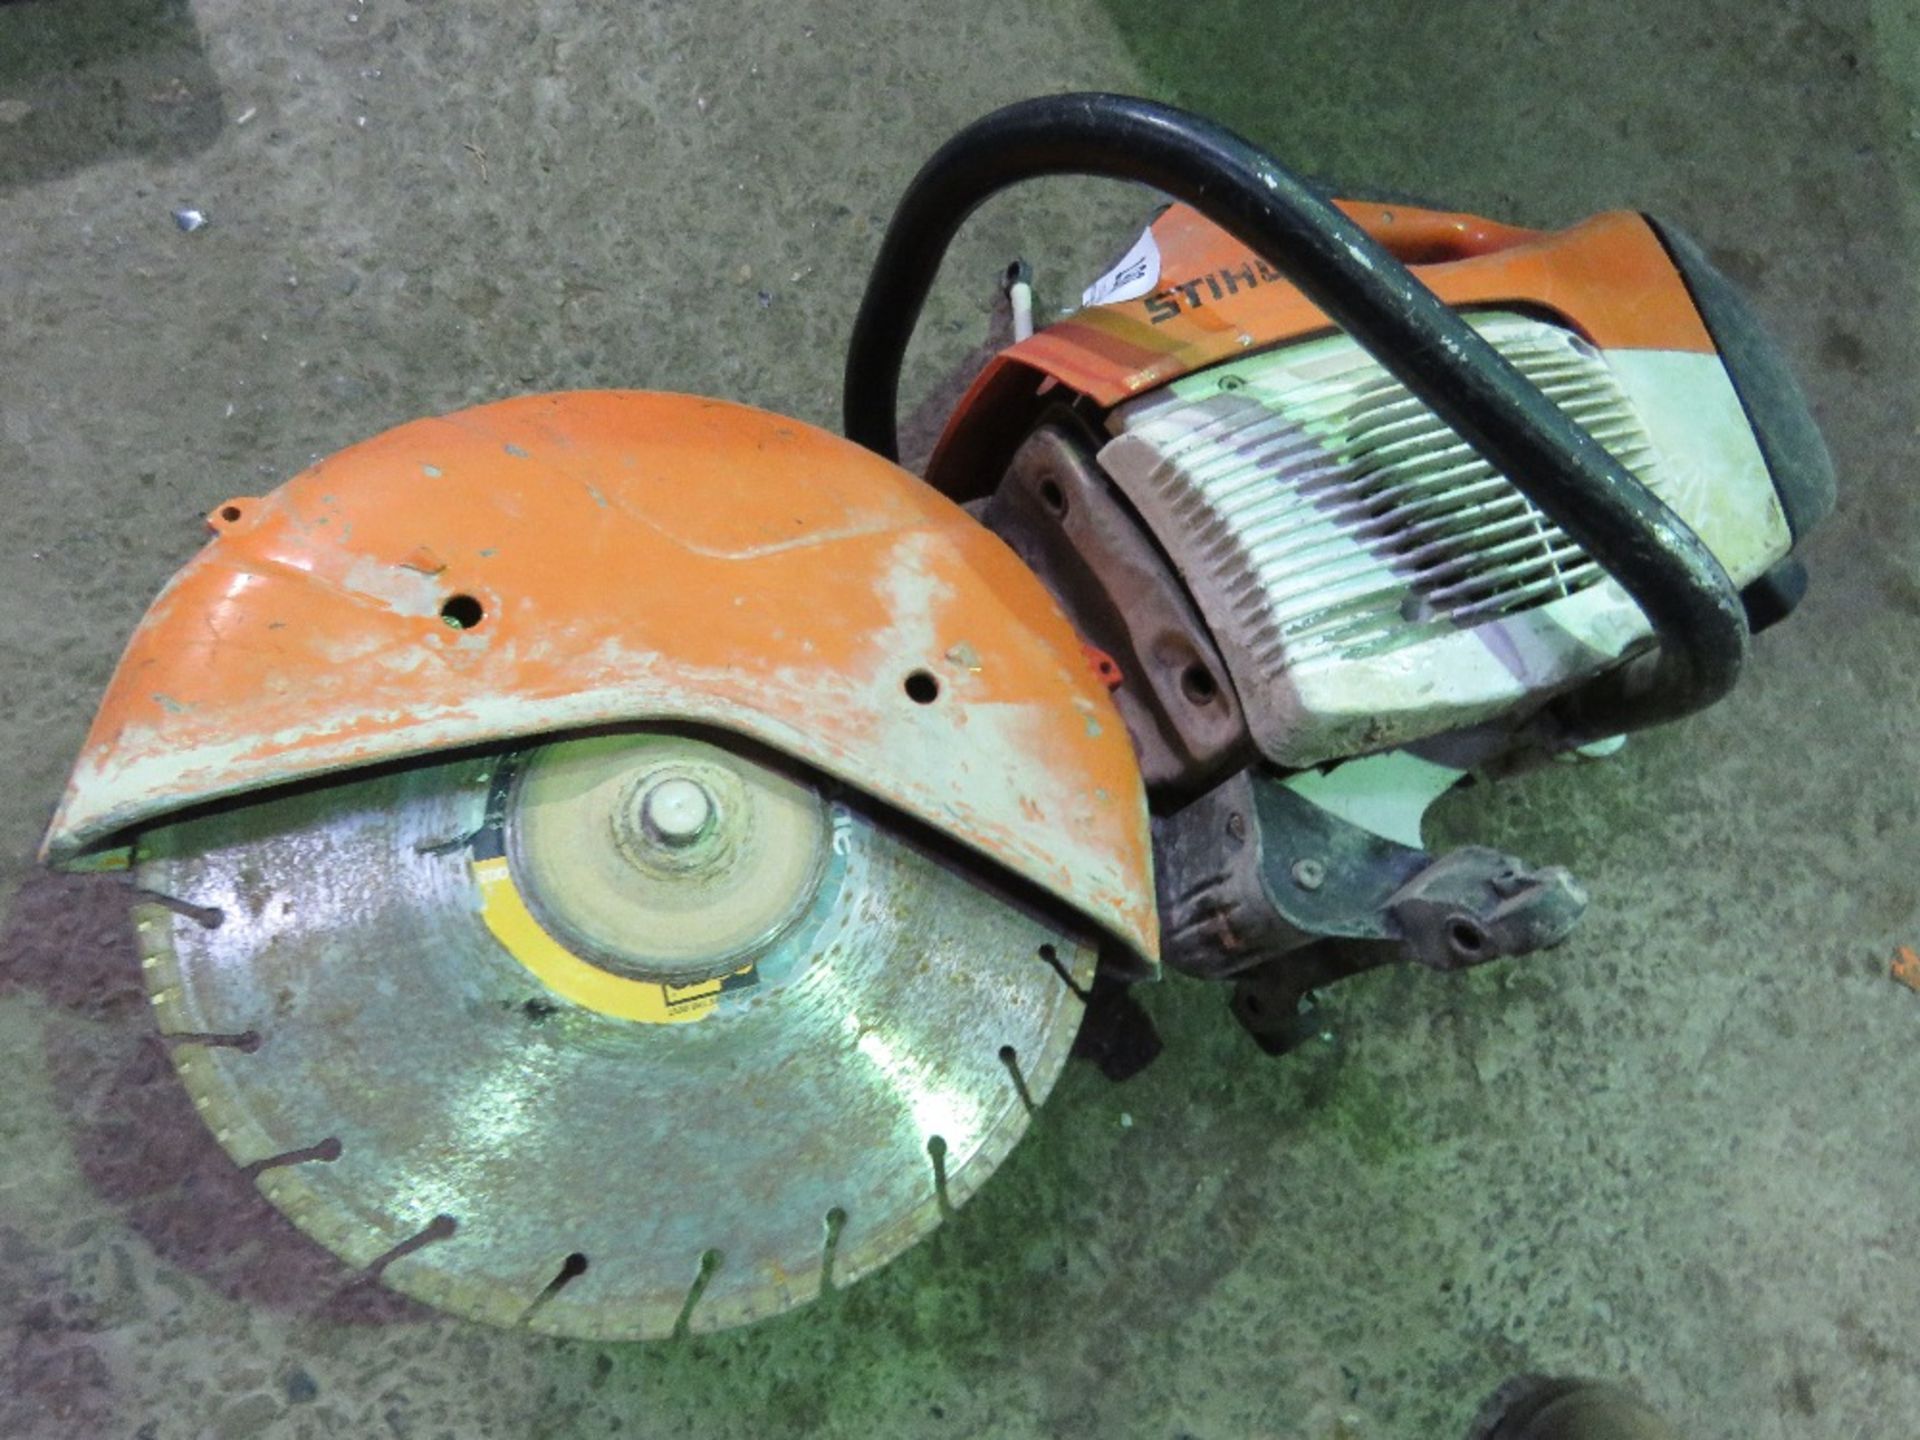 STIHL TS410 PETROL SAW WITH A BLADE. THIS LOT IS SOLD UNDER THE AUCTIONEERS MARGIN SCHEME, THEREF - Image 4 of 4